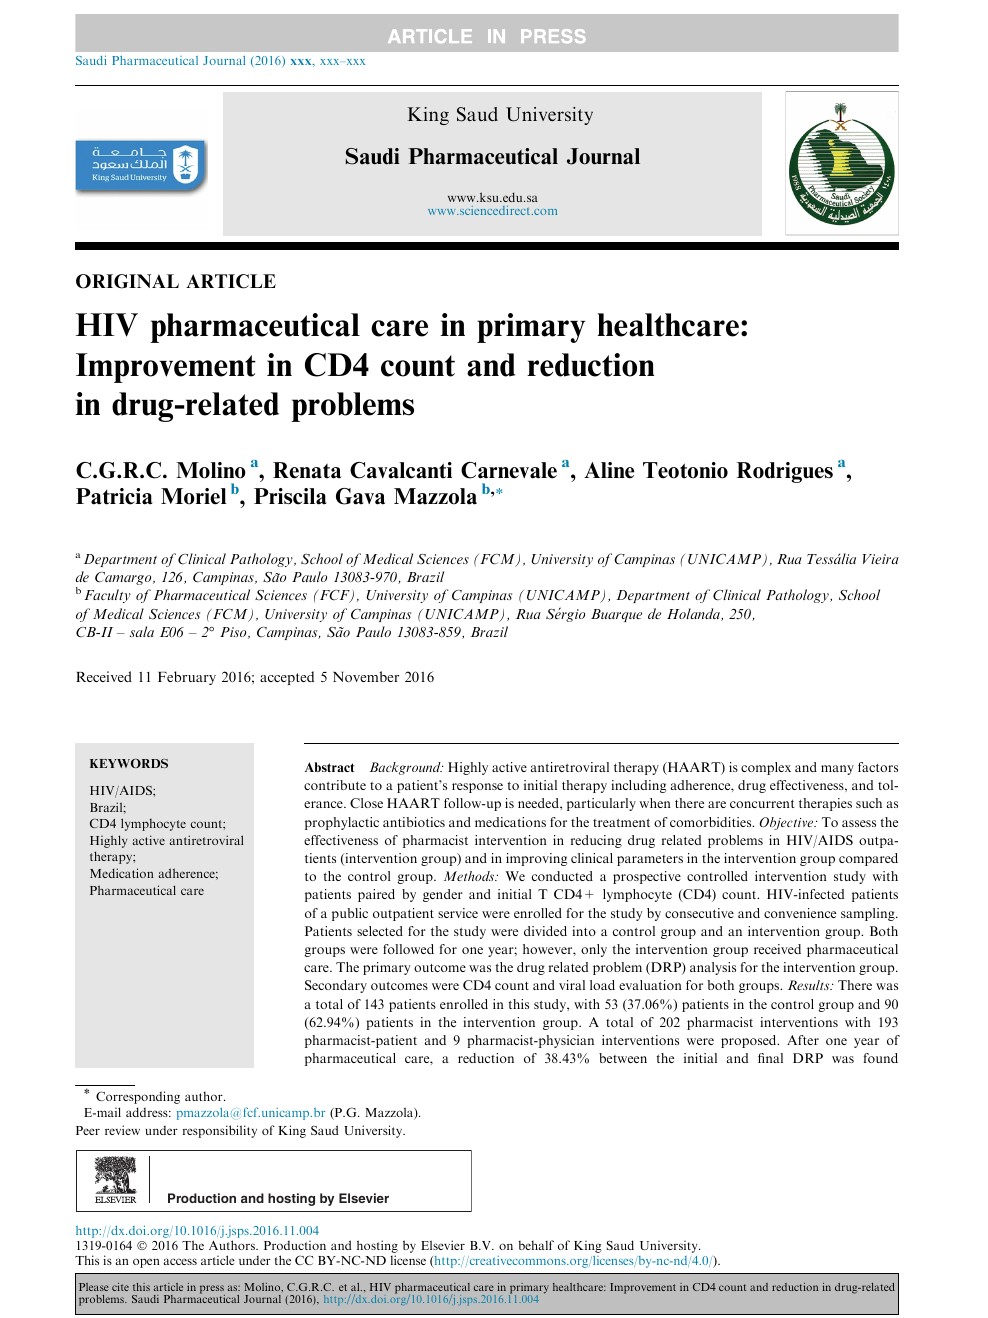 Hiv Pharmaceutical Care In Primary Healthcare Improvement In Cd4 Count And Reduction In Drug Related Problems Topic Of Research Paper In Economics And Business Download Scholarly Article Pdf And Read For Free